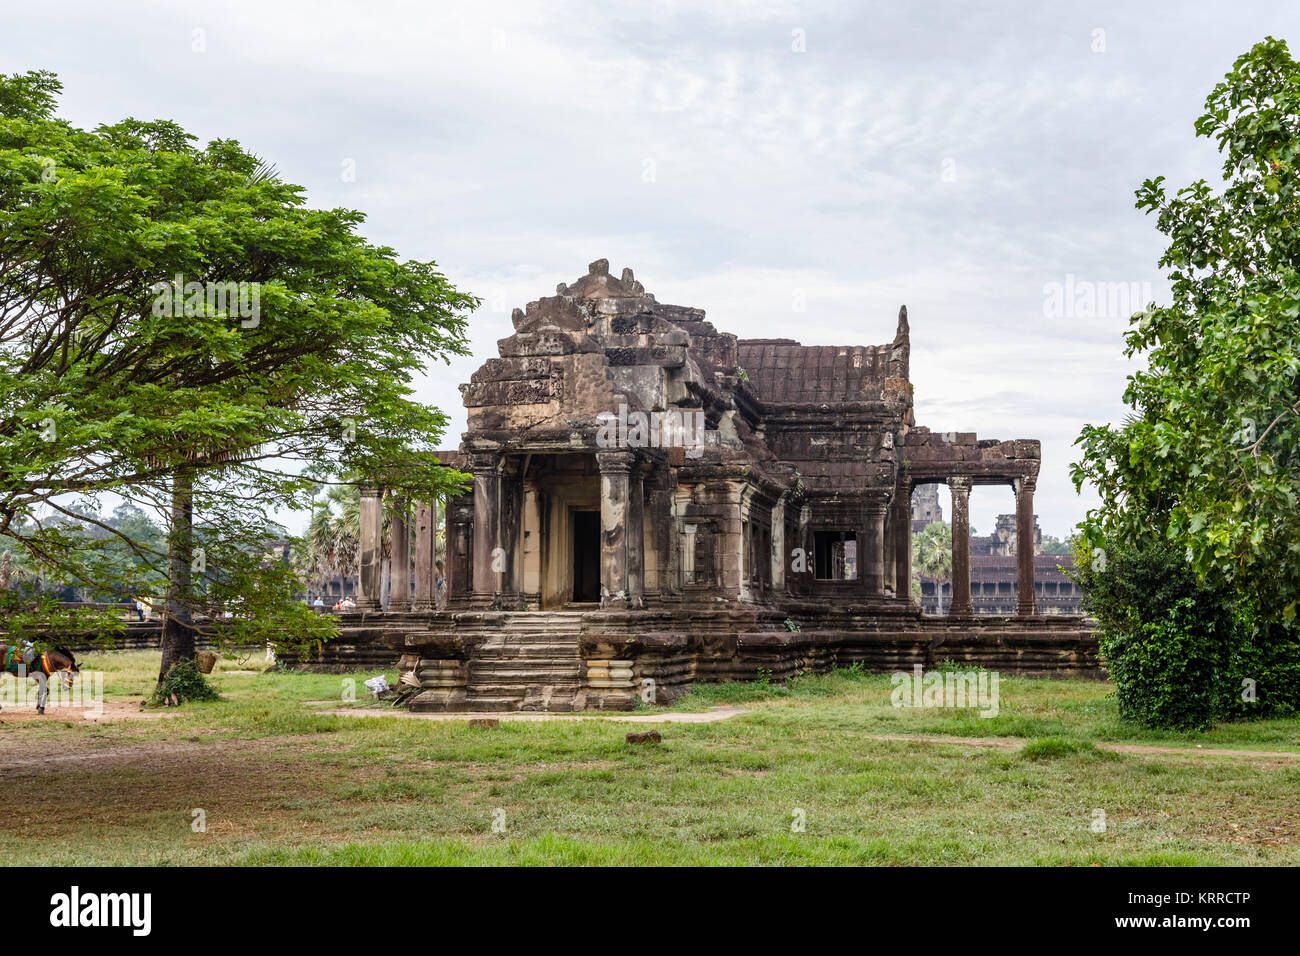 Dilapidated South Library building view in the grounds of Angkor Wat, a temple complex, Siem Reap, Cambodia, the world's largest religious monument Stock Photo